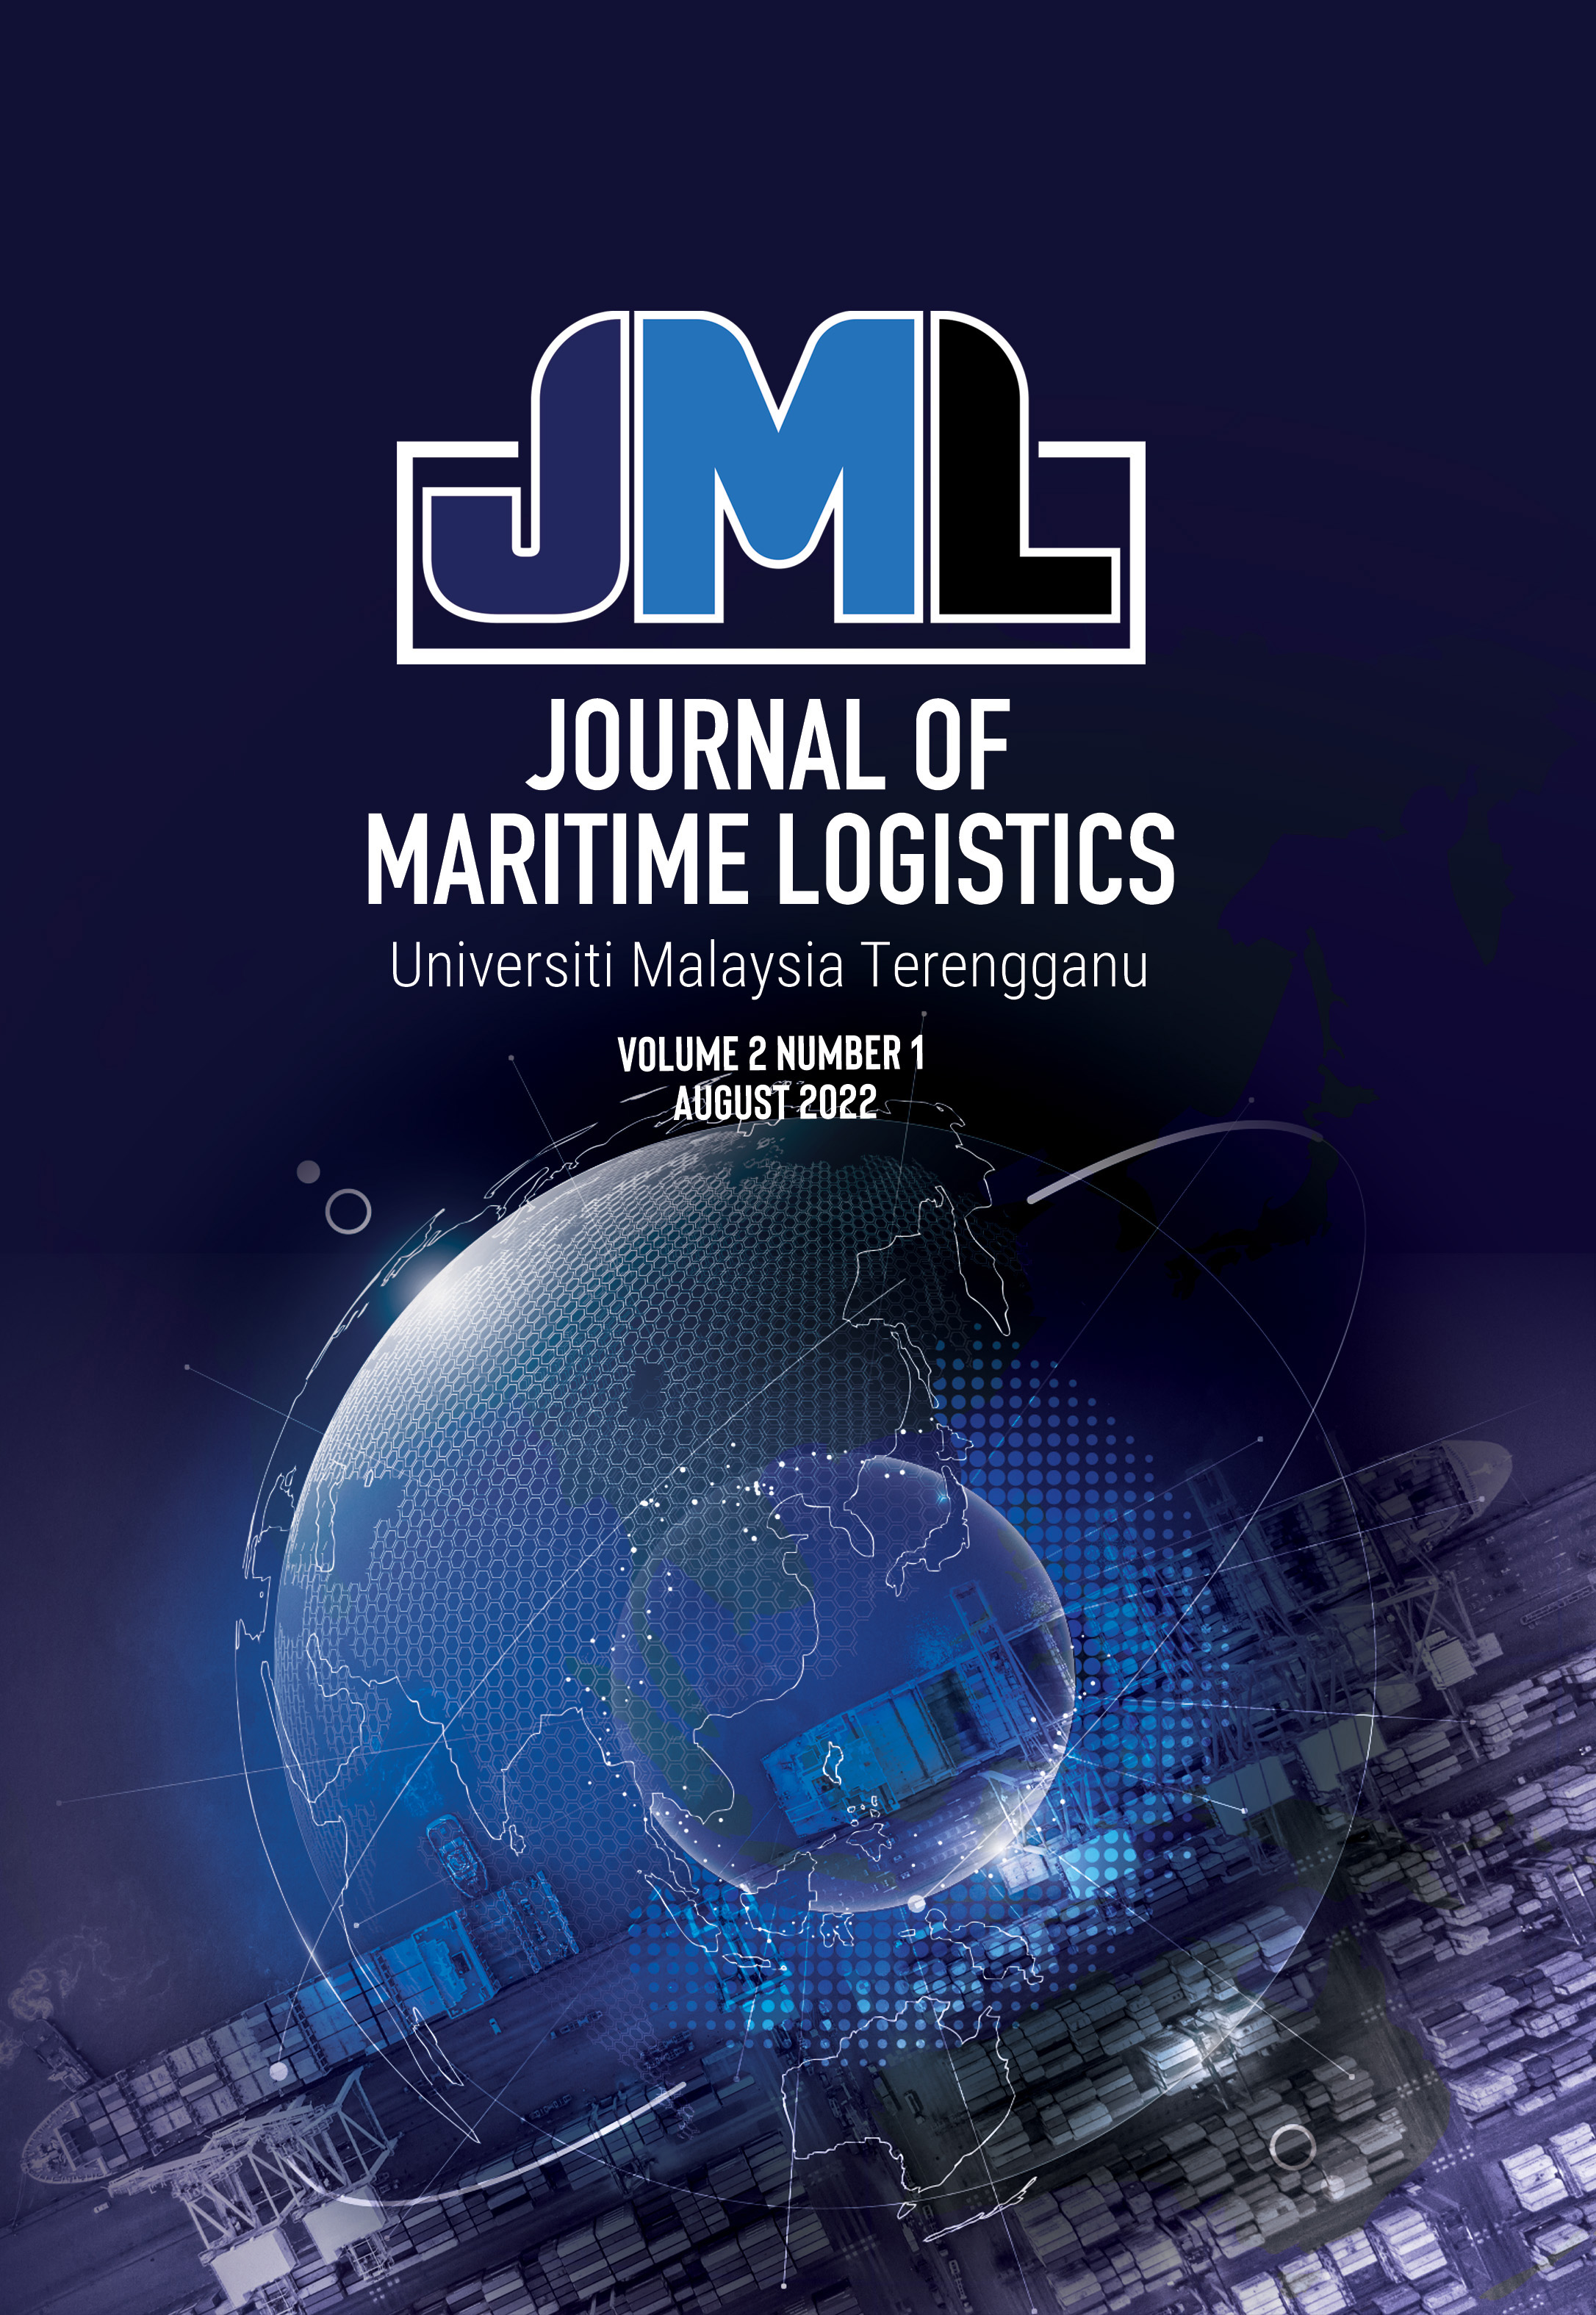 					View Vol. 2 No. 1:  Journal of Maritime Logistics, Volume 2 Issue 1, August 2022 
				